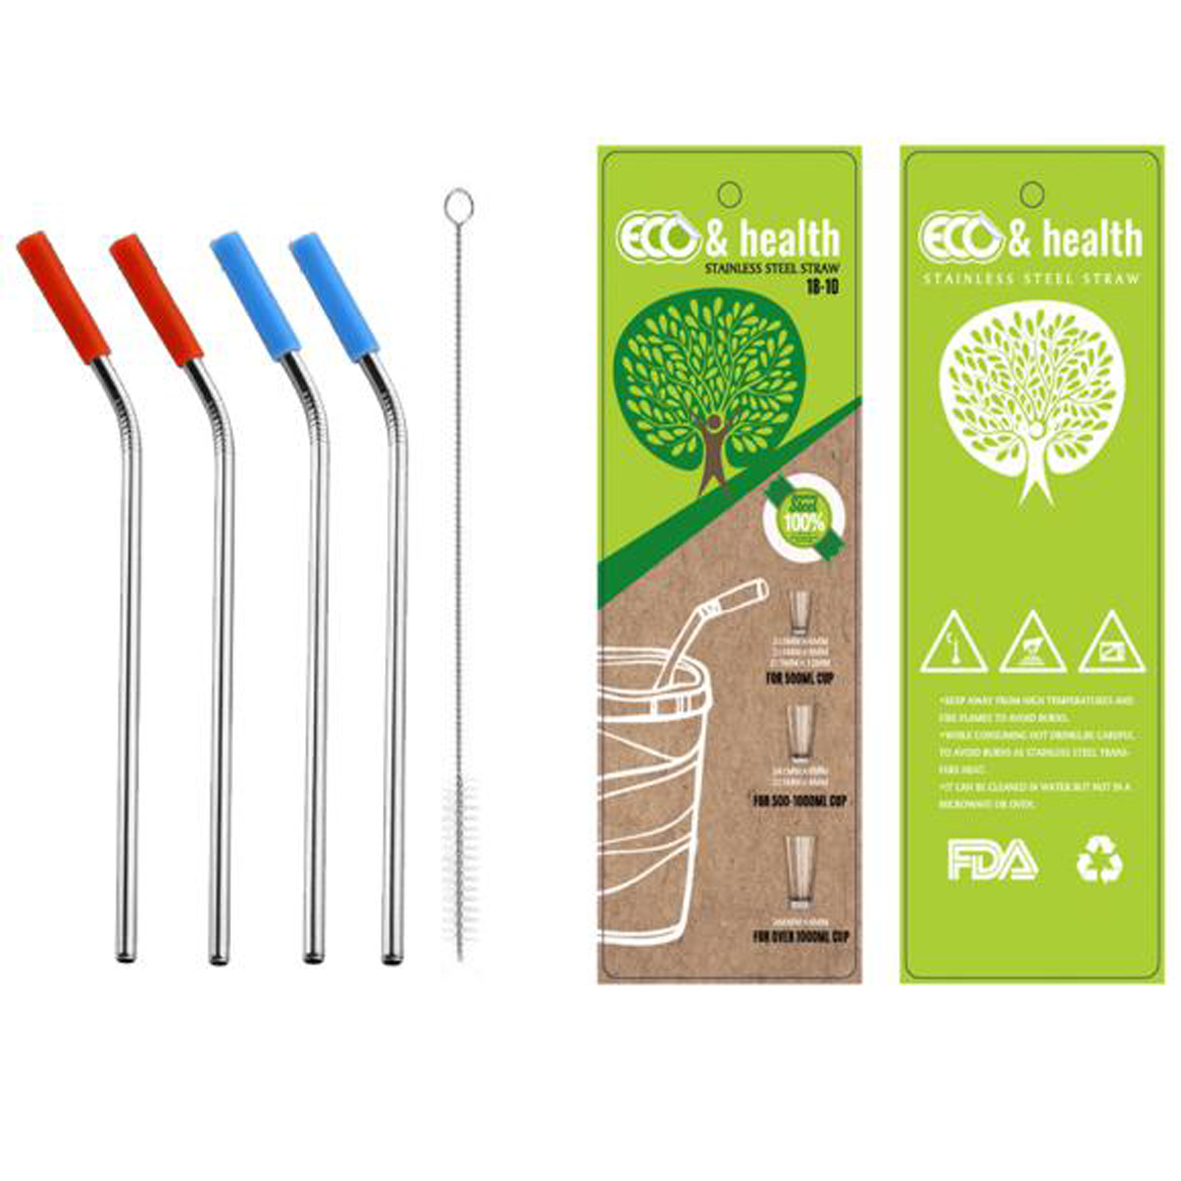 GL-ELY1268 5 in 1 Curved Stainless Steel Straw Set with Blister Package